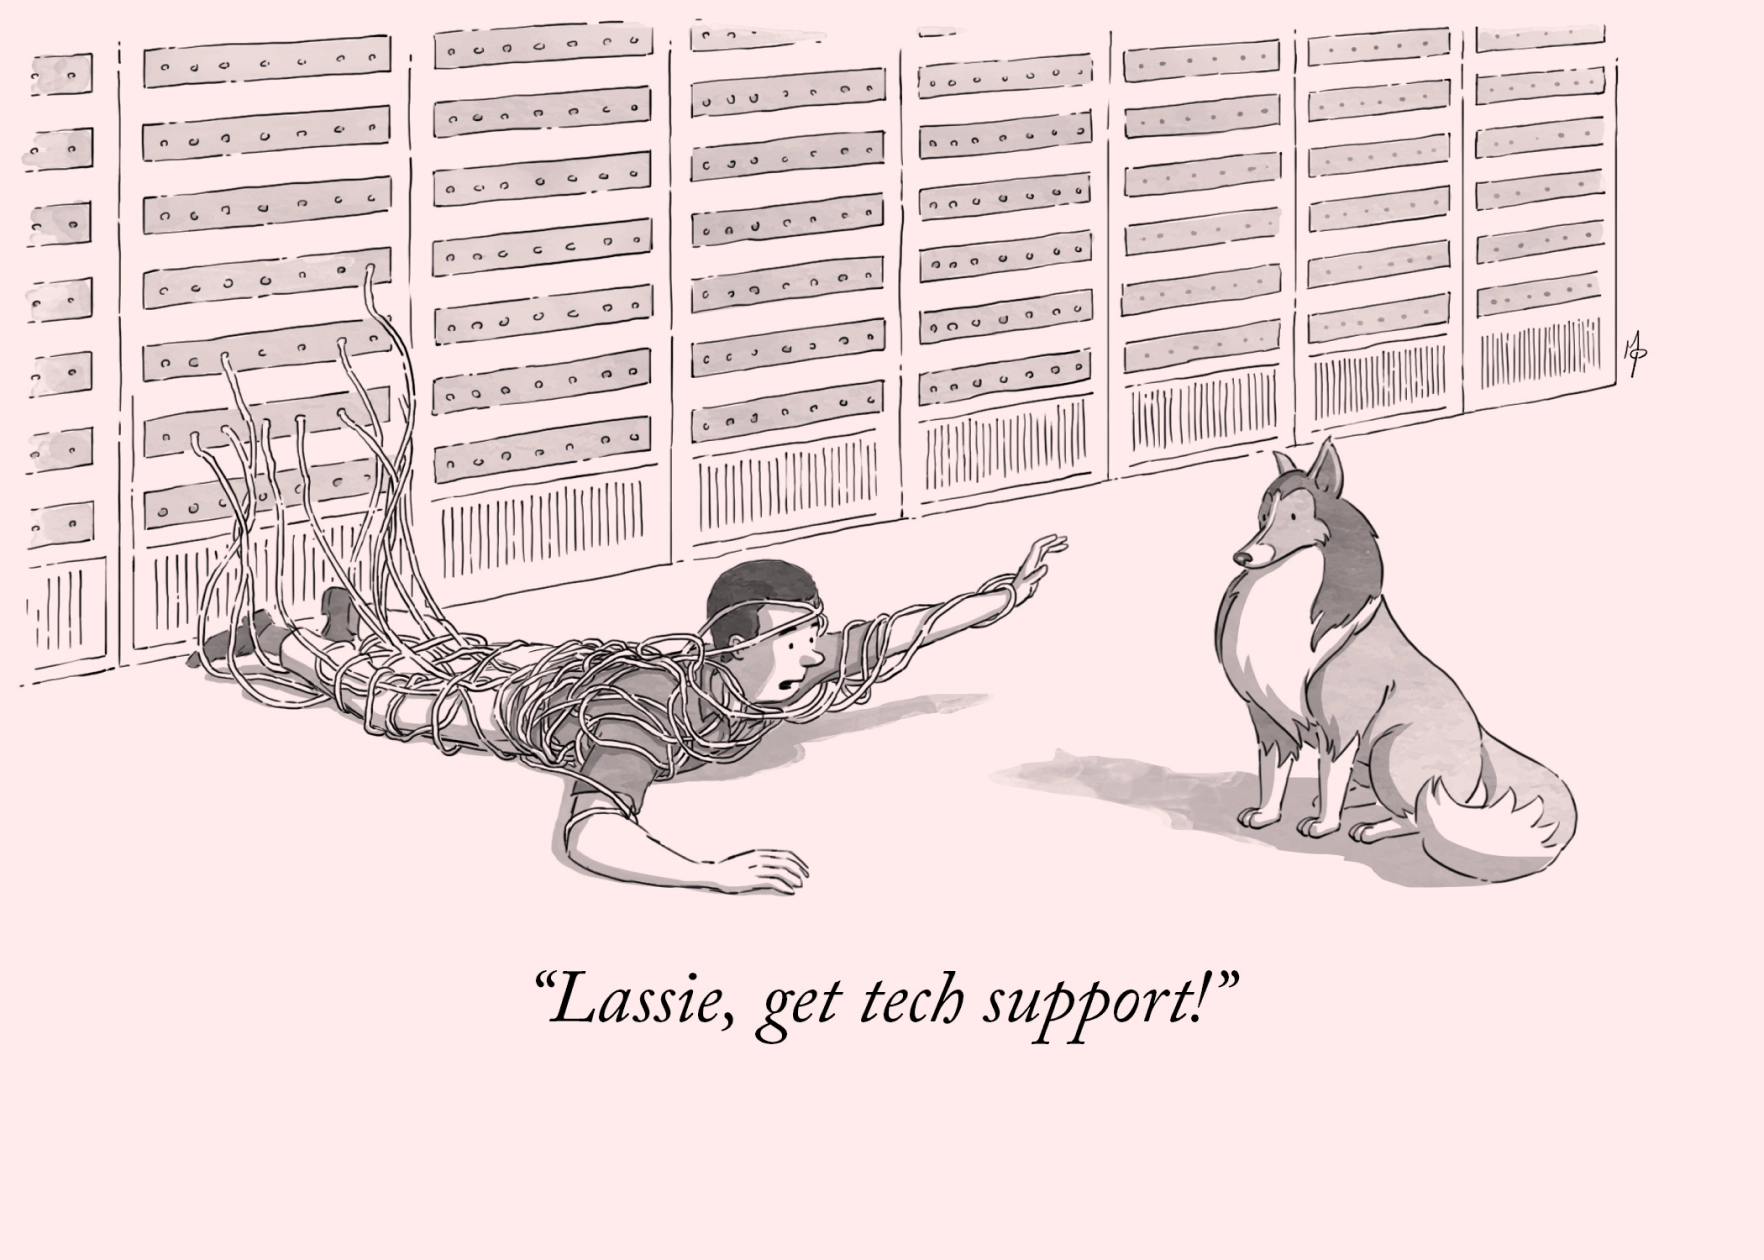 A cartoon-style illustration of a man heavily tangled with network wires in a server room. He is on the floor, frustrated, unable to let himself off the cables, and asking for help from a dog named Lassie. The caption reads: Lassie, get tech support.